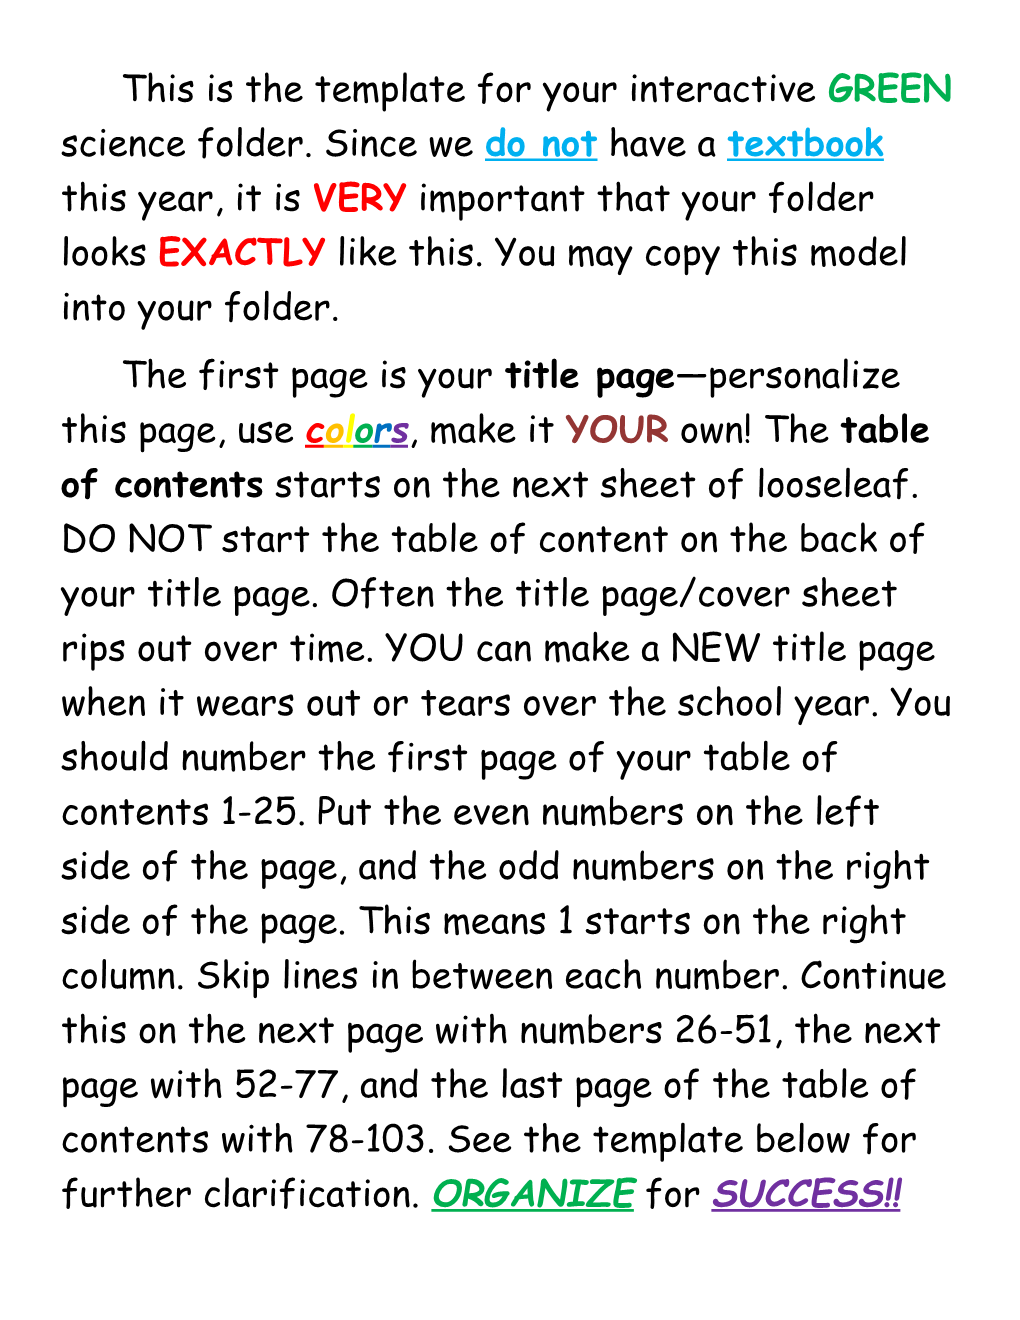 The First Page Is Your Title Page Personalize This Page, Use Colors, Make It YOUR Own!